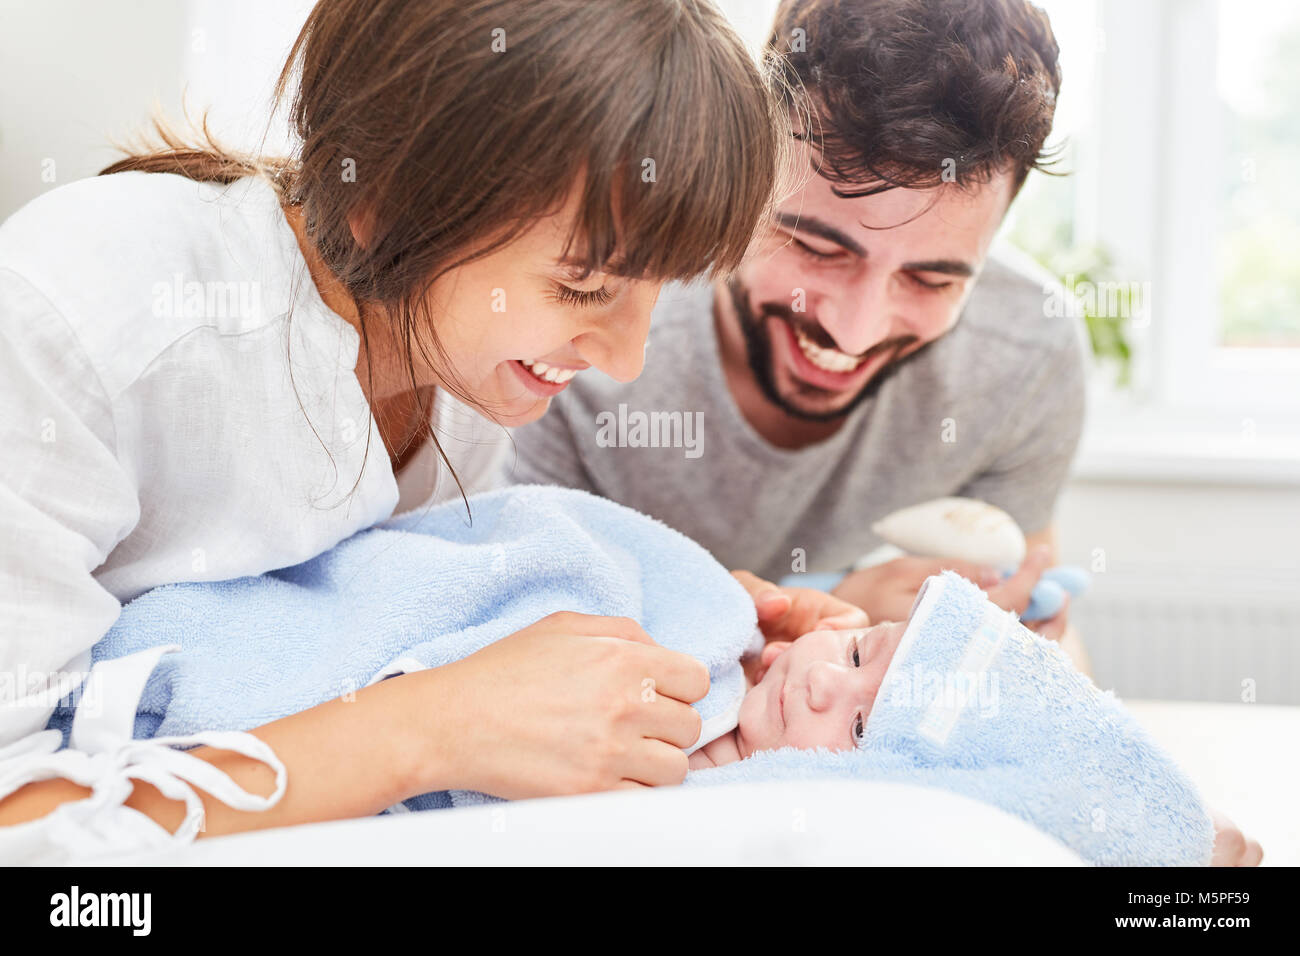 Father and mother happily look at their baby wrapped in a towel Stock Photo